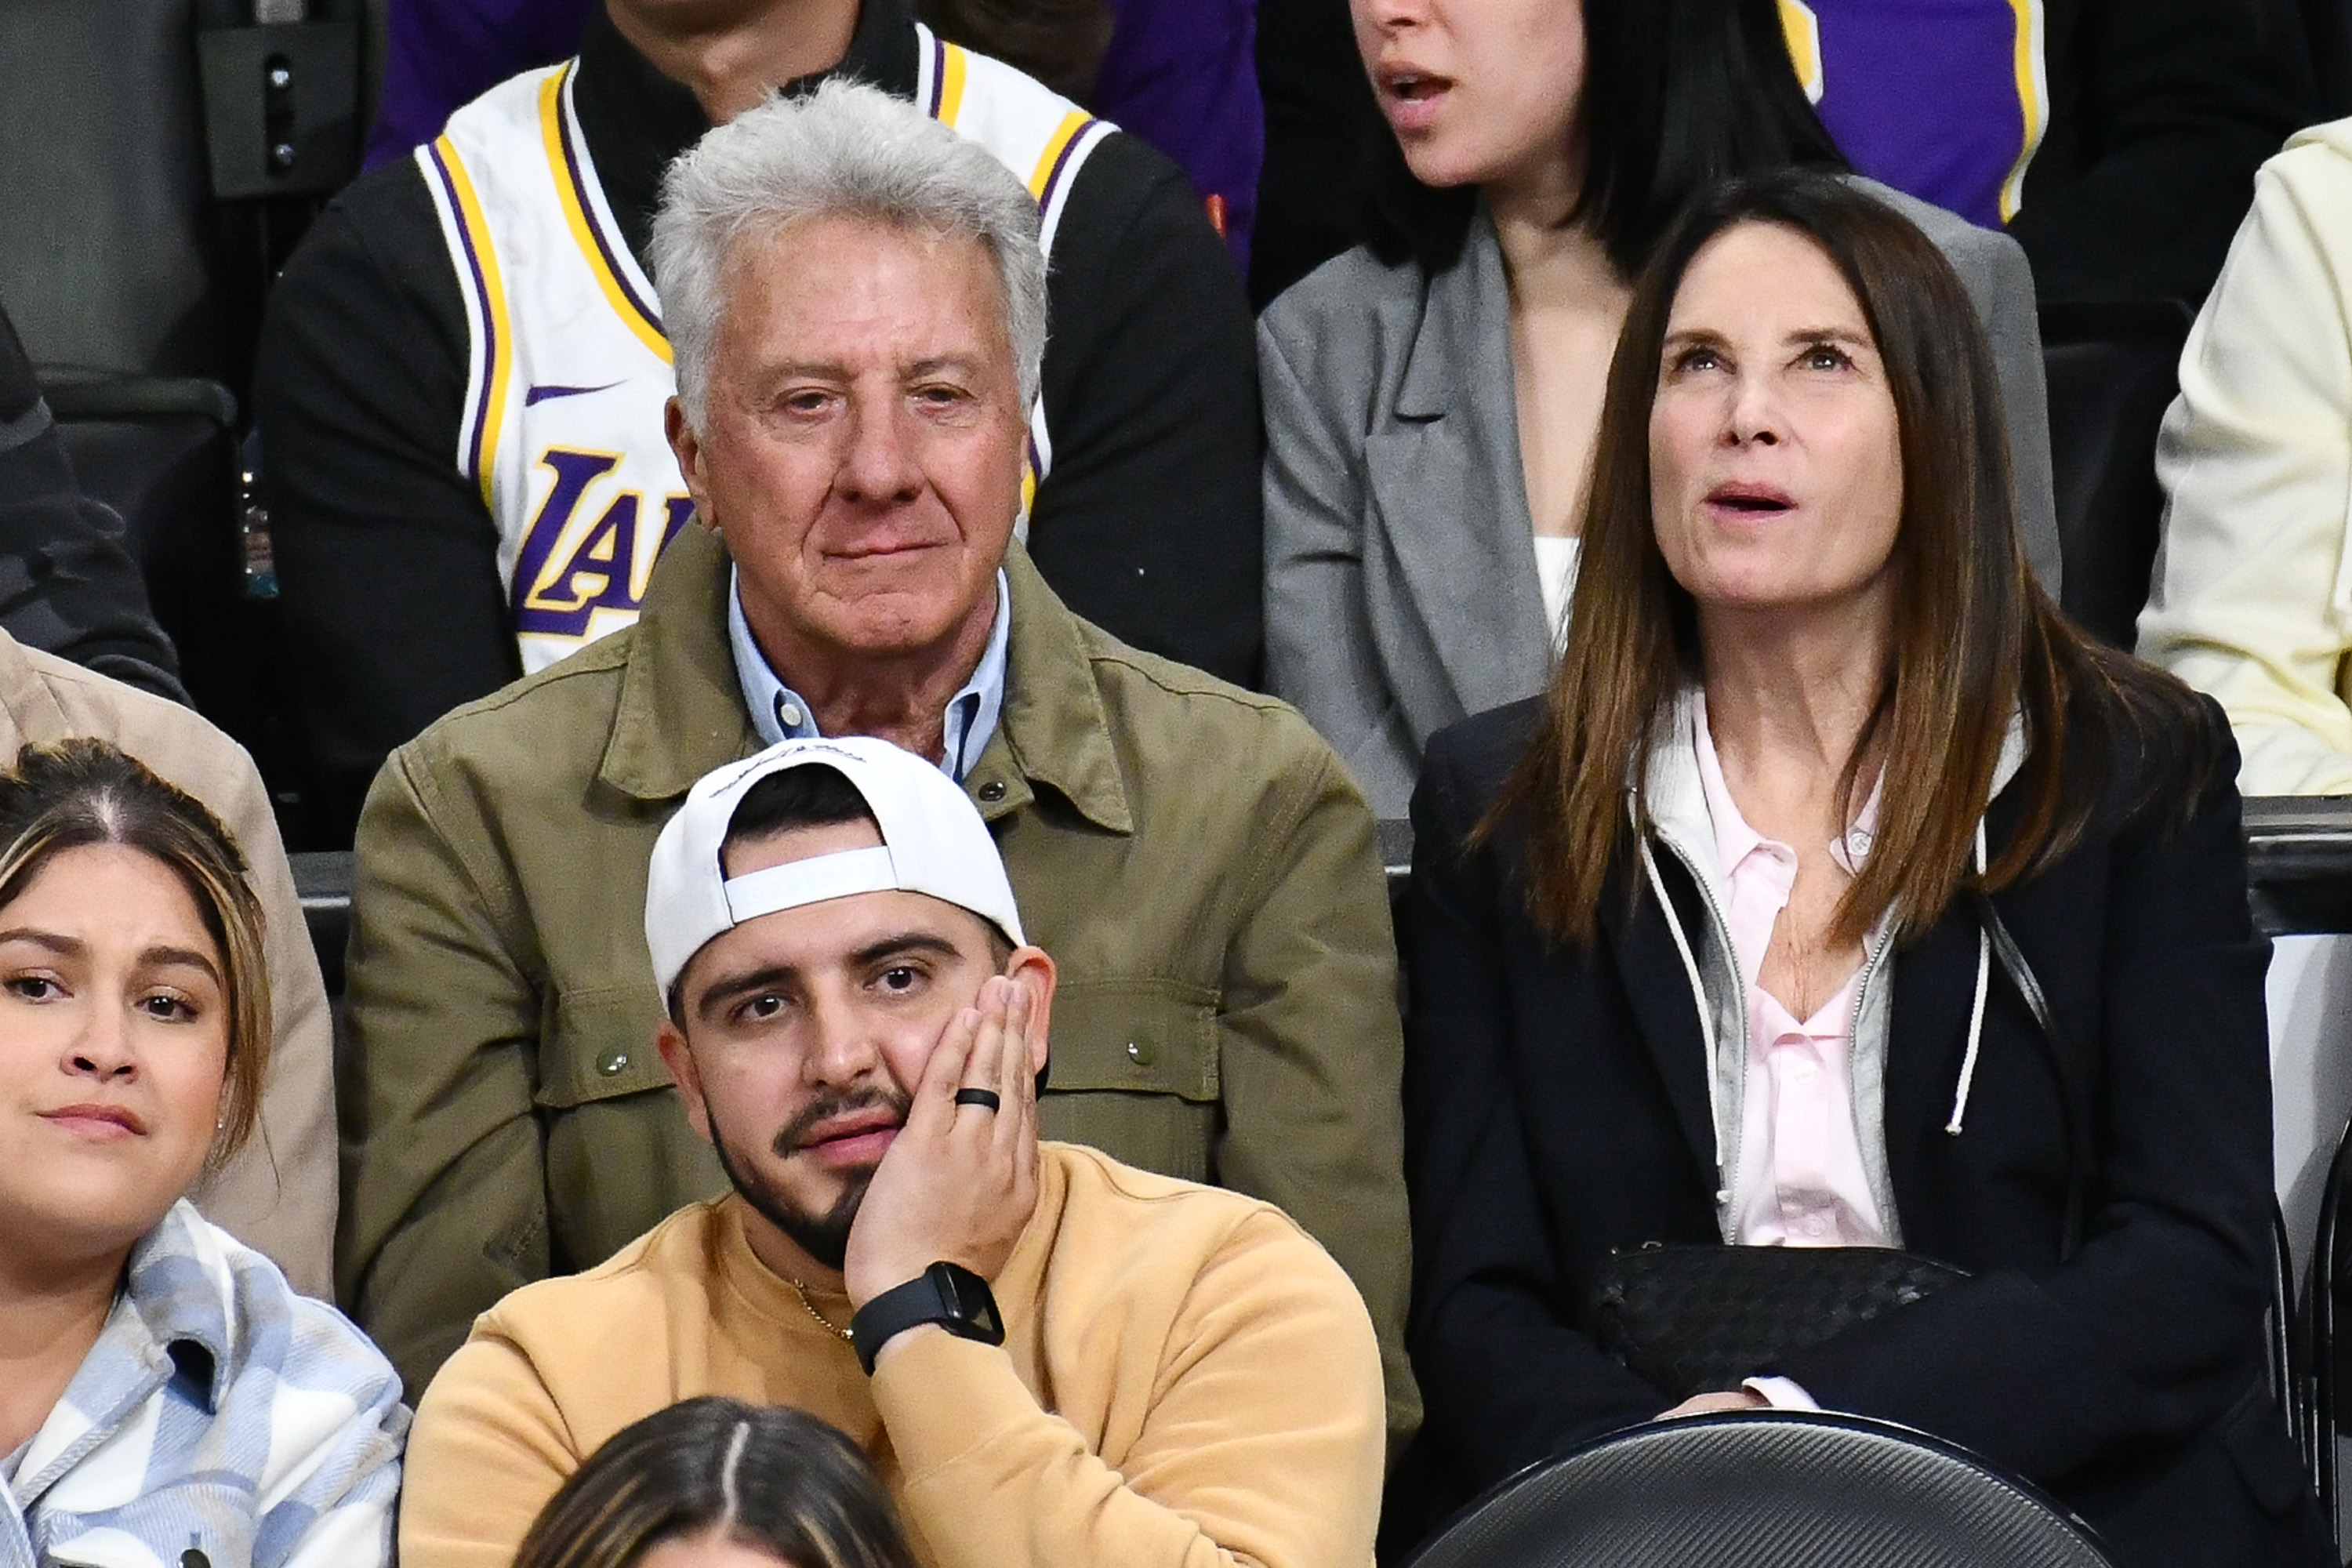 Dustin Hoffman and Lisa Hoffman at a basketball game between the Los Angeles Lakers and the San Antonio Spurs in Los Angeles, California on November 20, 2022. | Source: Getty Images